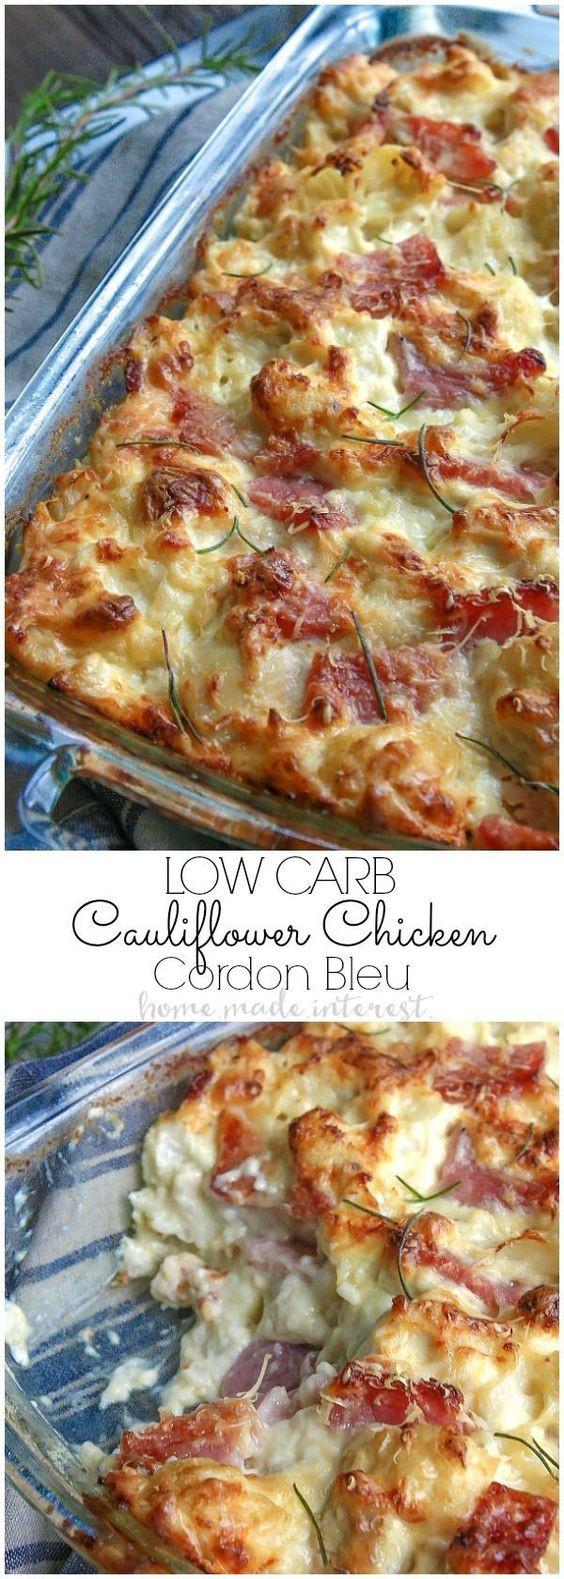 Best Low Carb Canned Chicken Recipes